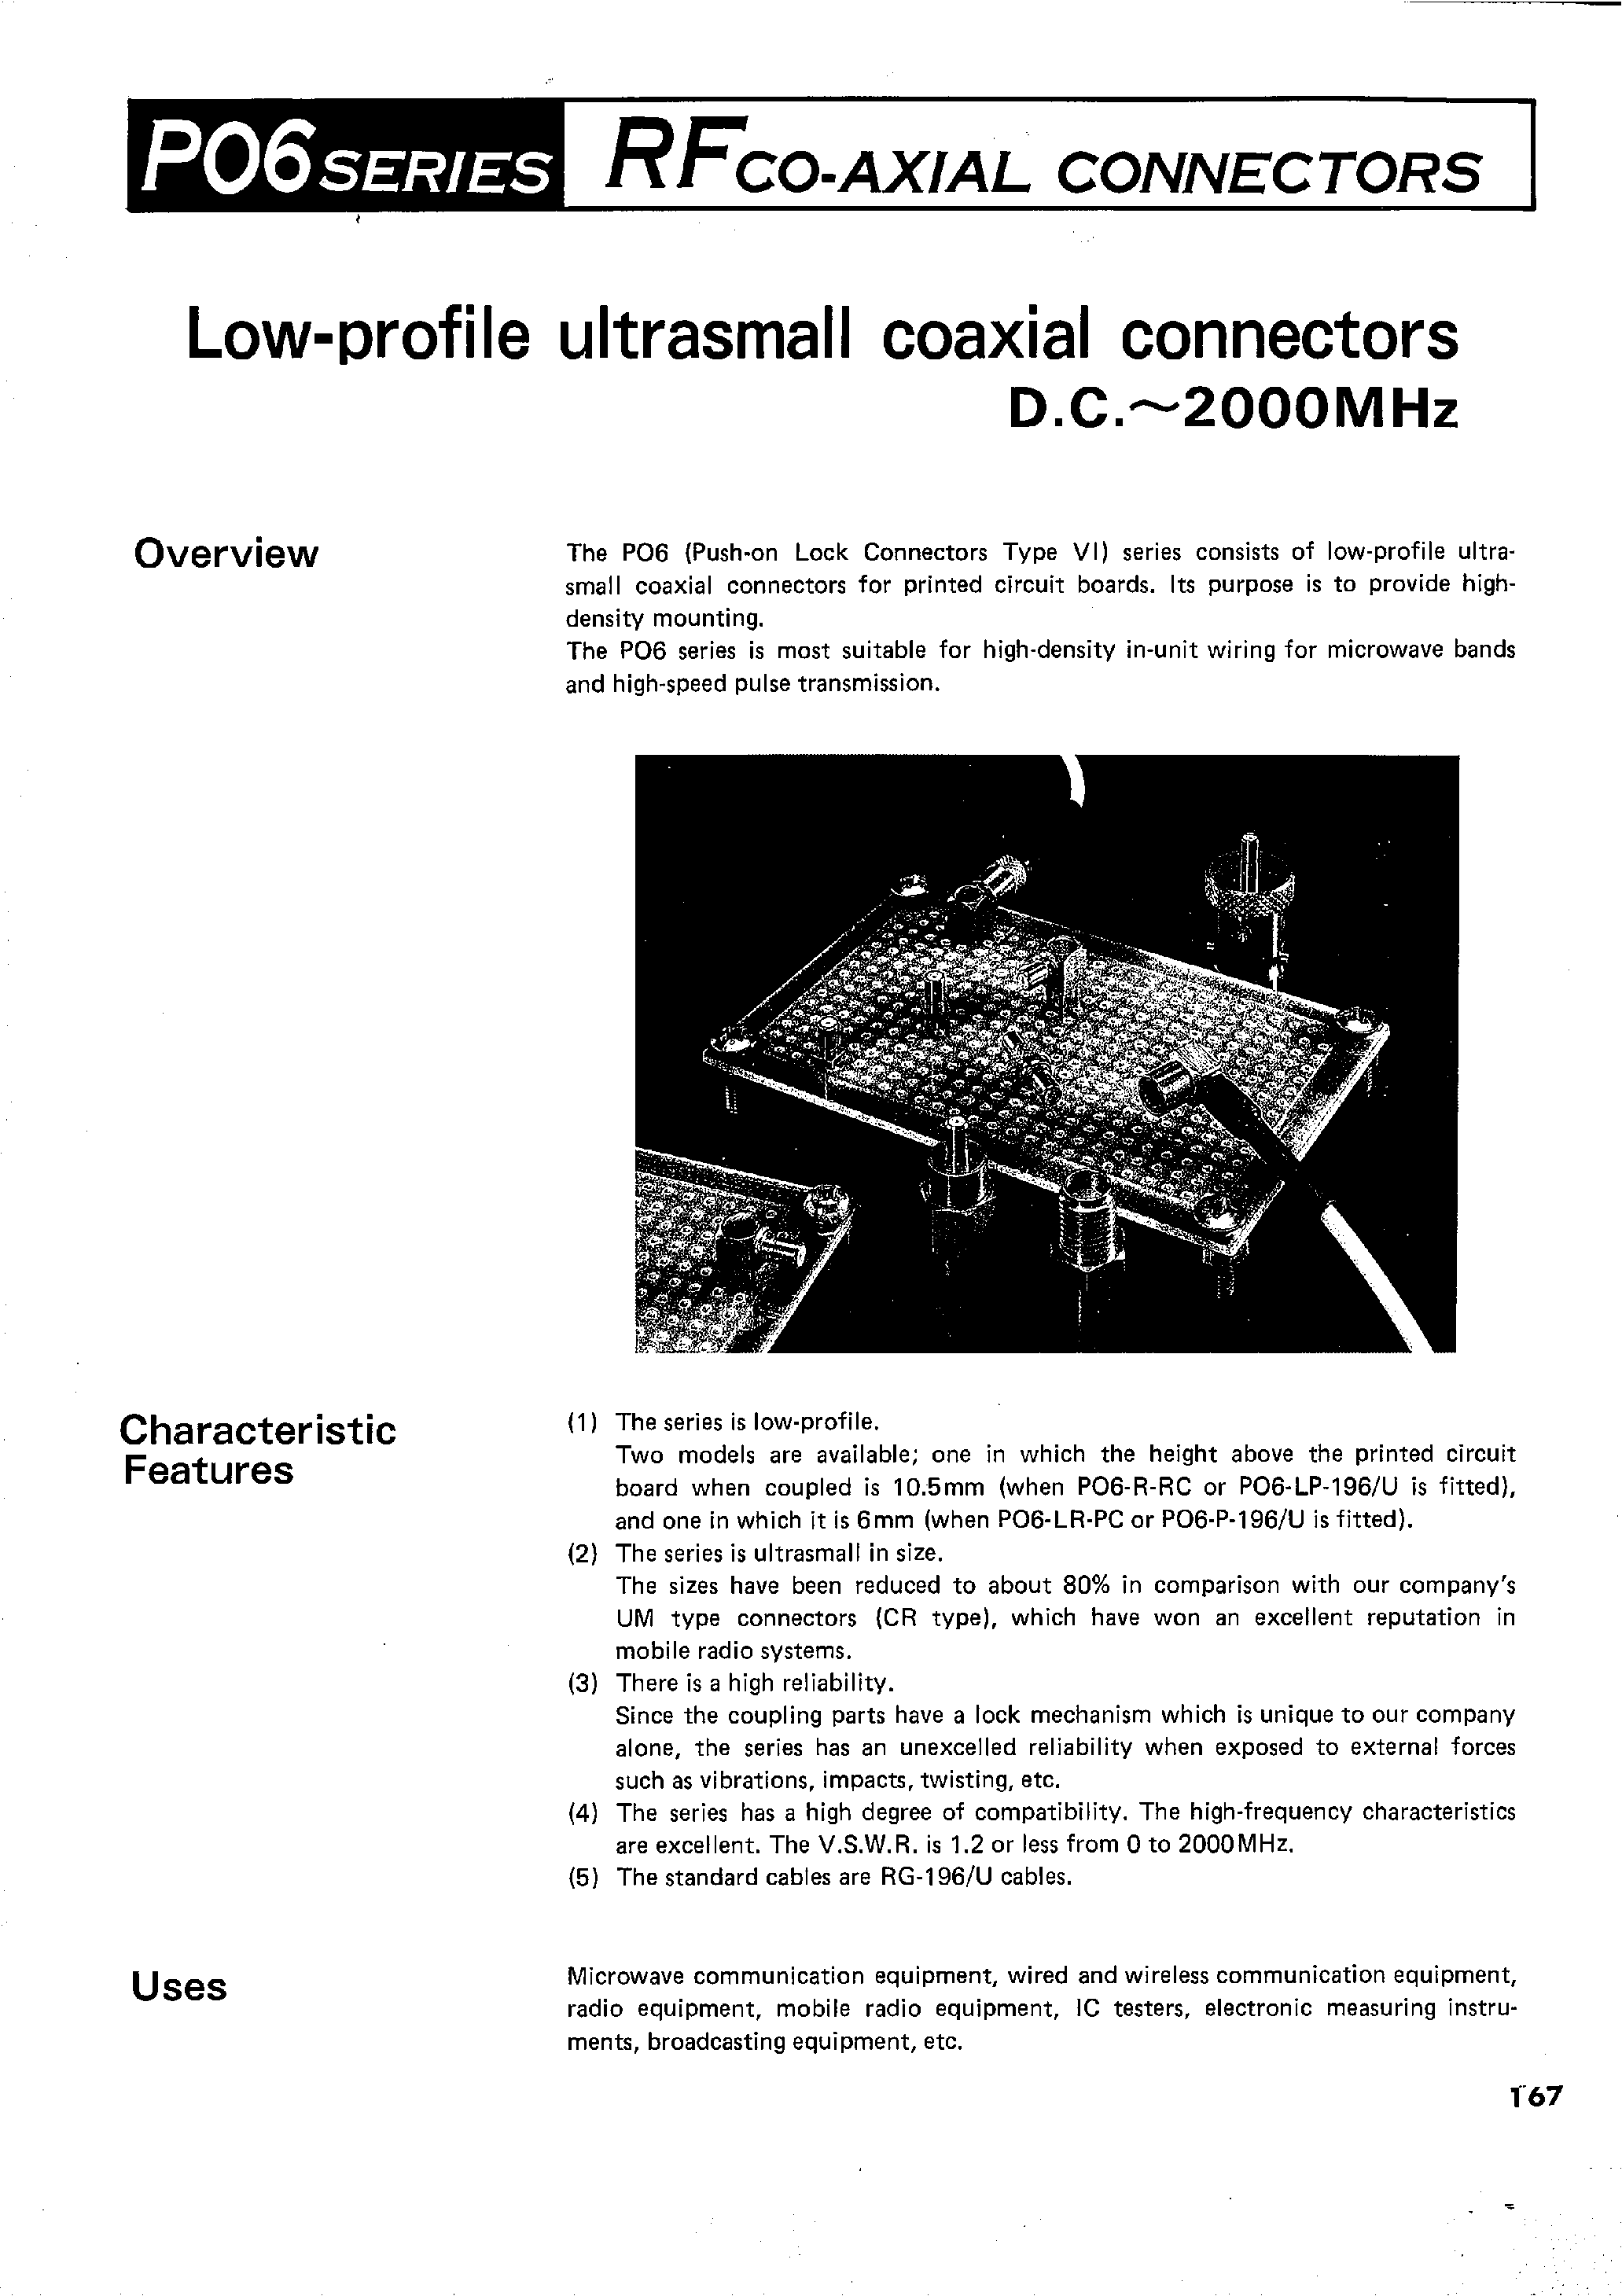 Datasheet PO6-R-PC - RFCO-AXIAL CONNECTORS(Low-profile ultrasmall coaxial connector) page 1